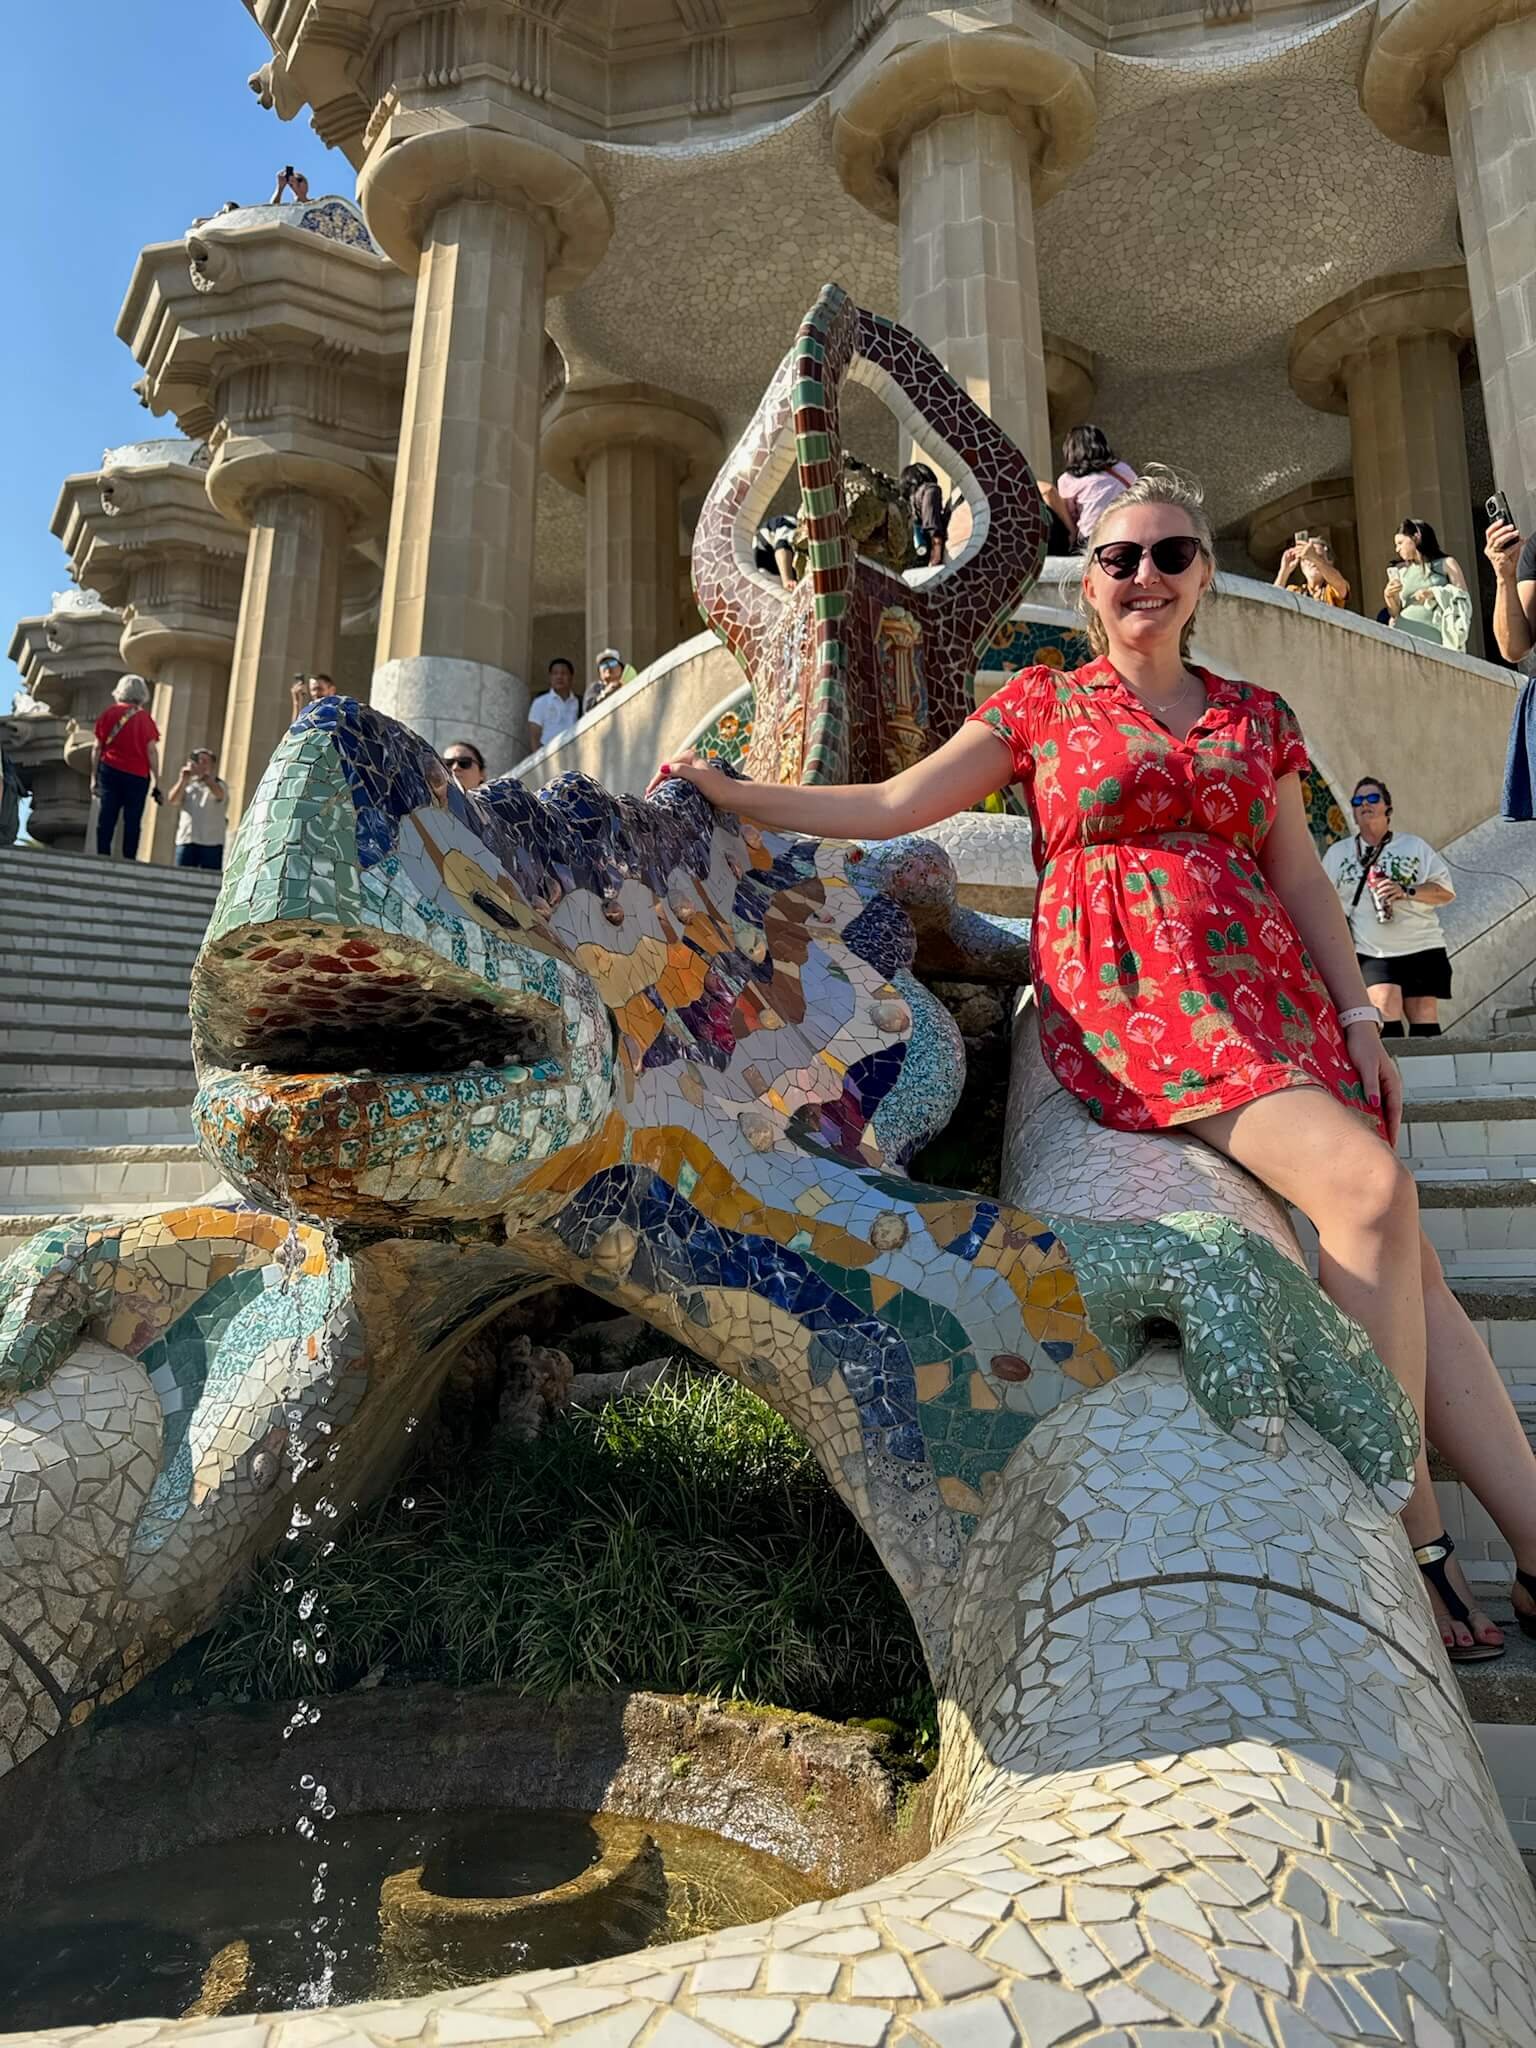 Heather Moore sitting next to the lizard in Park Güell